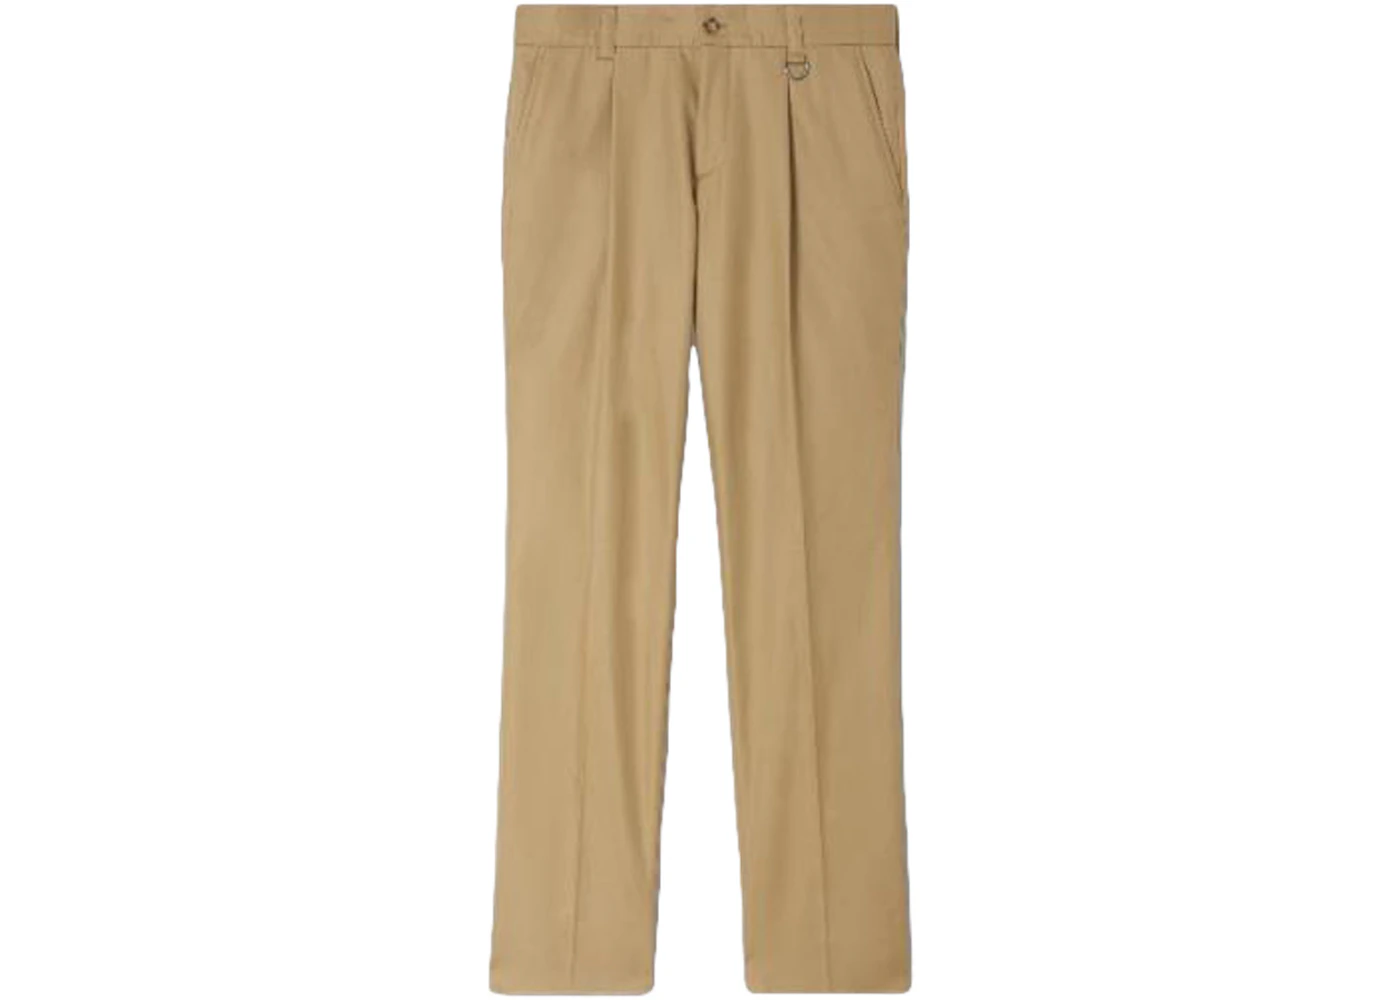 Burberry Tailored Chino Pants Beige Men's - US